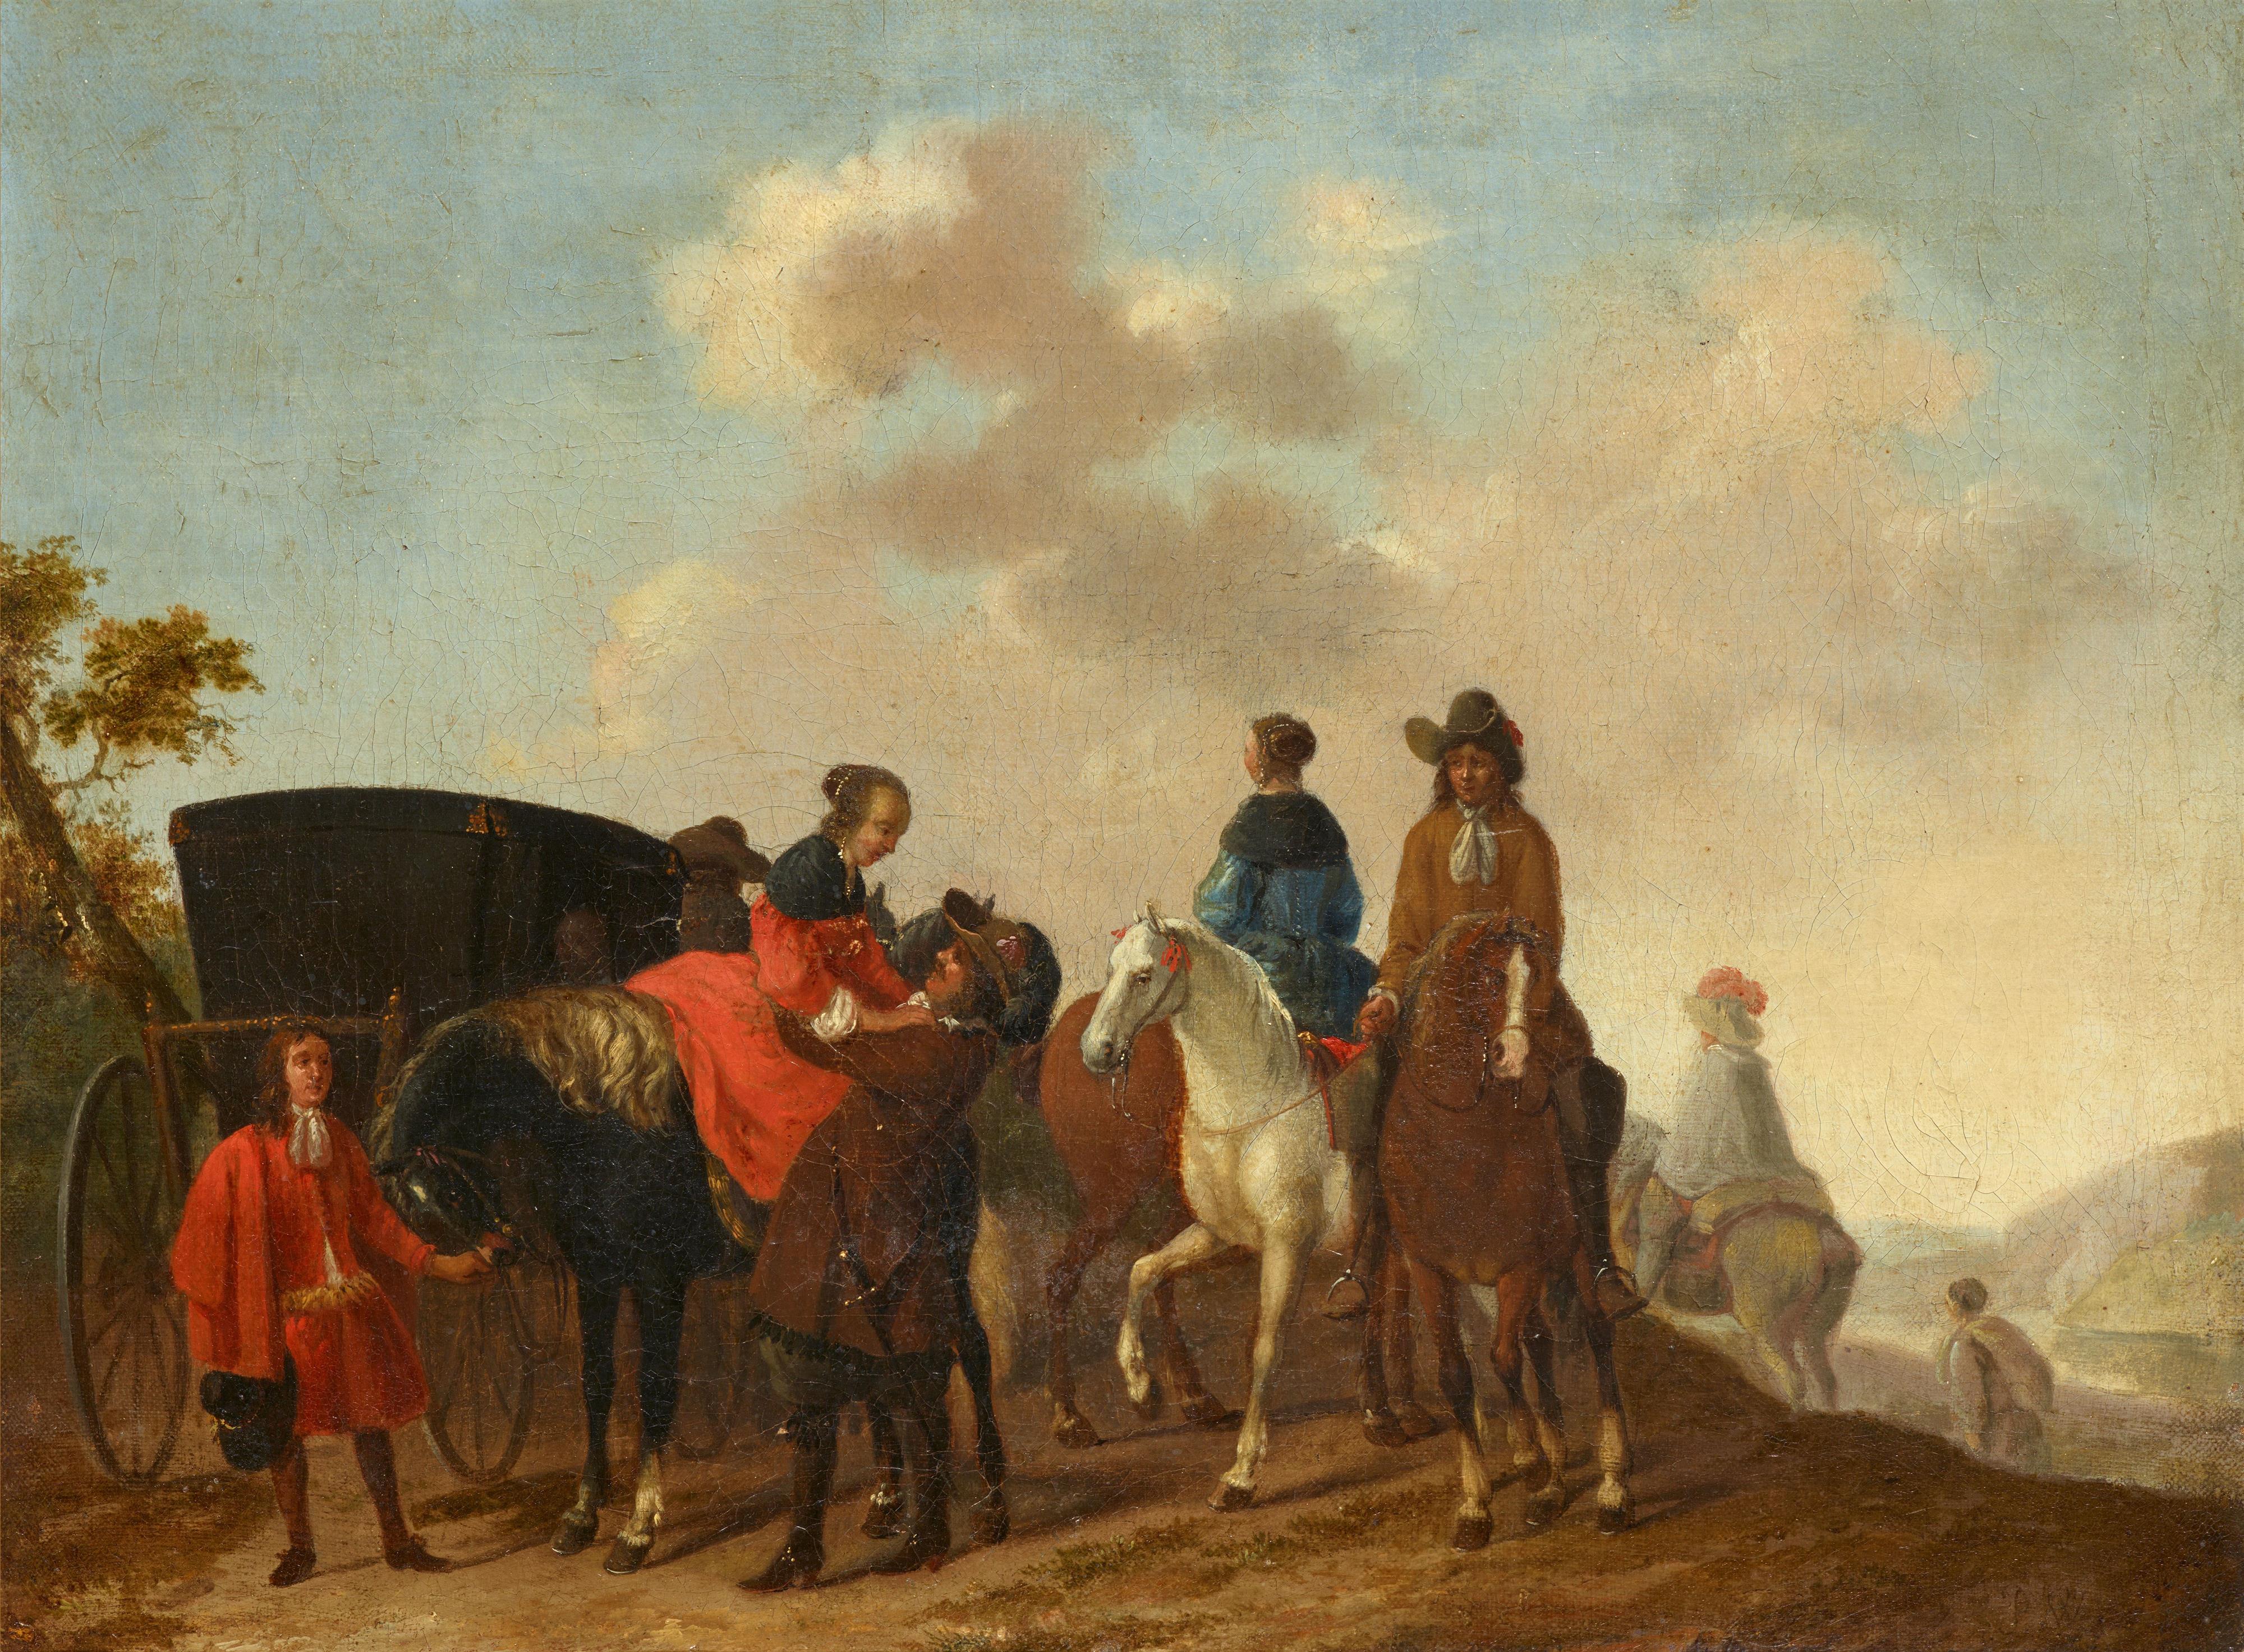 Pieter Wouwerman - Travelling Scene with Carriage and Rider - image-1